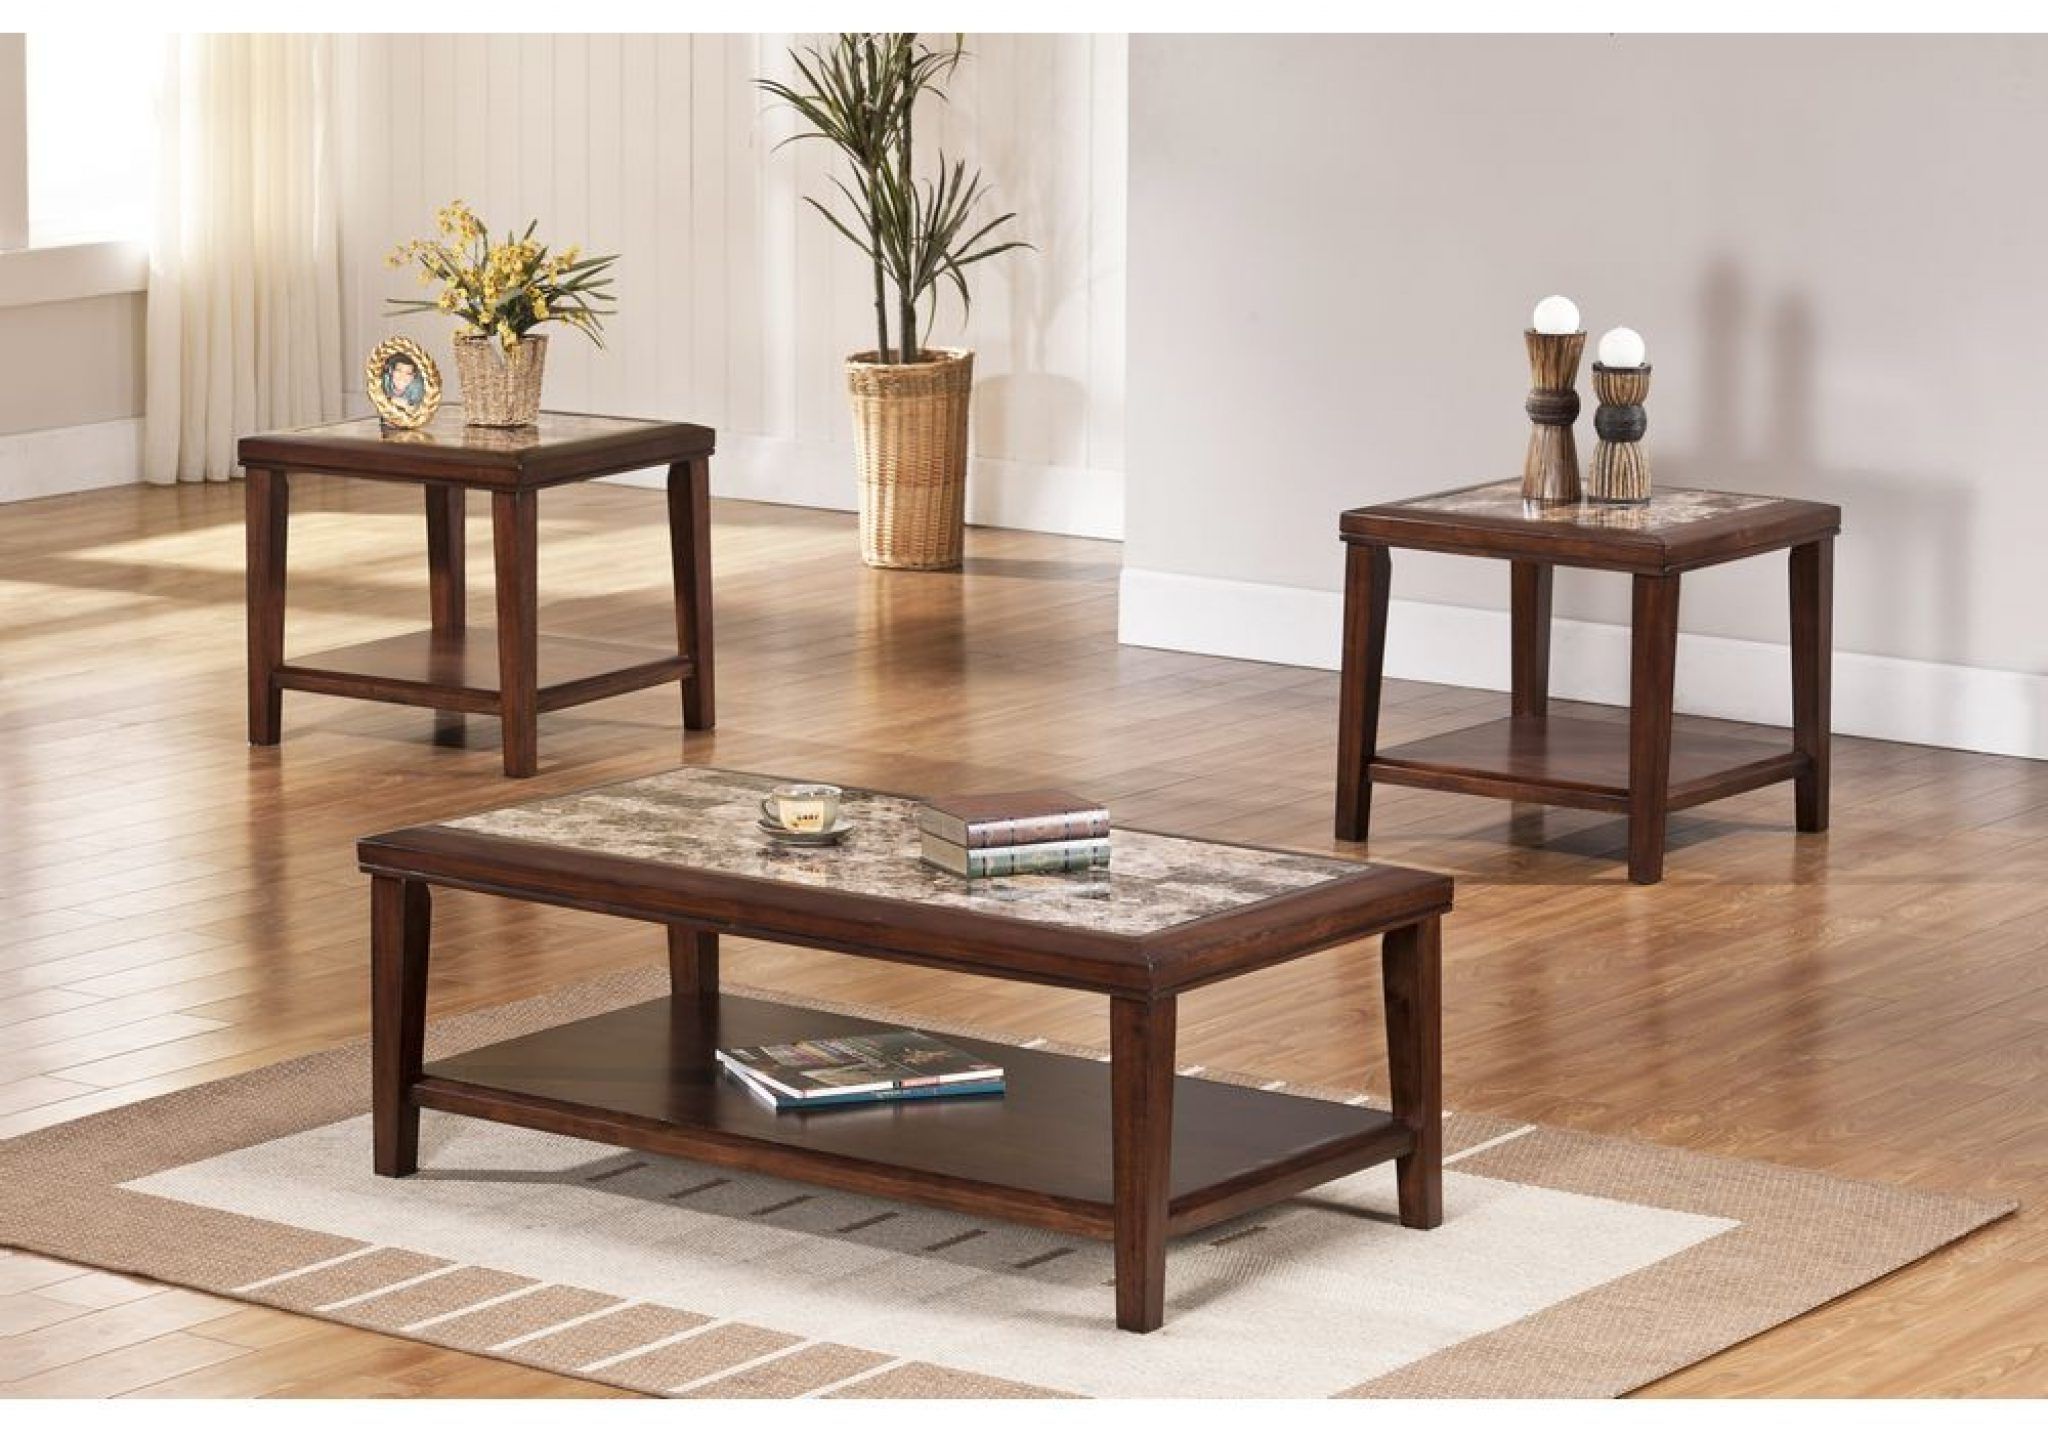 3 Piece Coffee Tables Intended For Preferred 3 Piece Coffee Table Set In Faux Marble Insert – Mattress  (View 4 of 10)